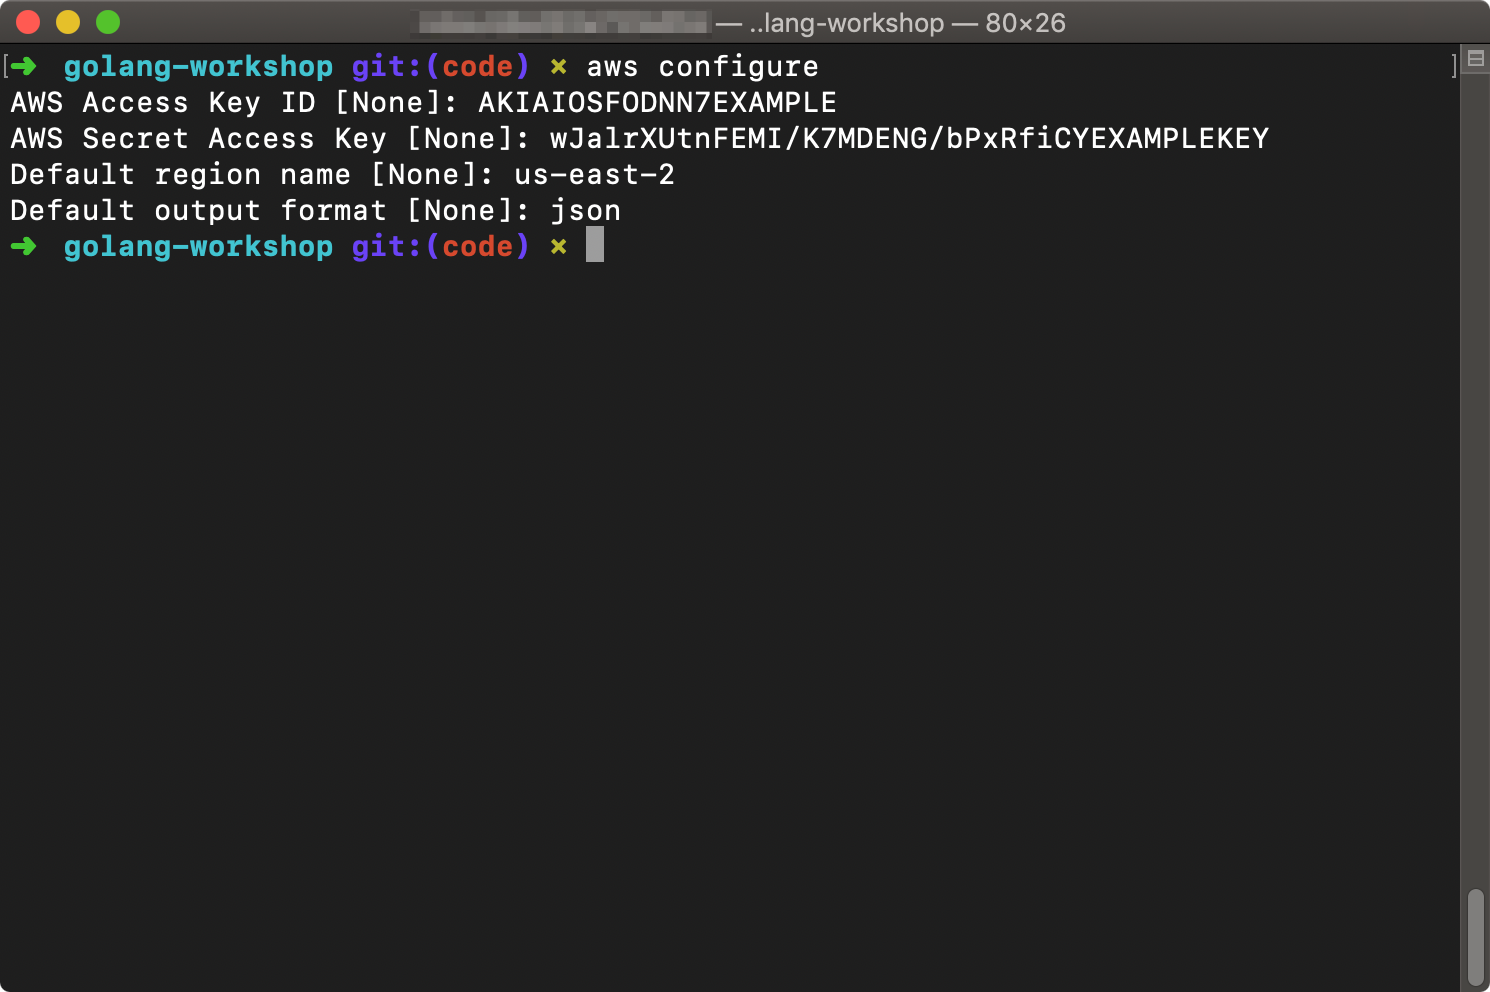 A screen capture of output of 'aws-configure' in a terminal window